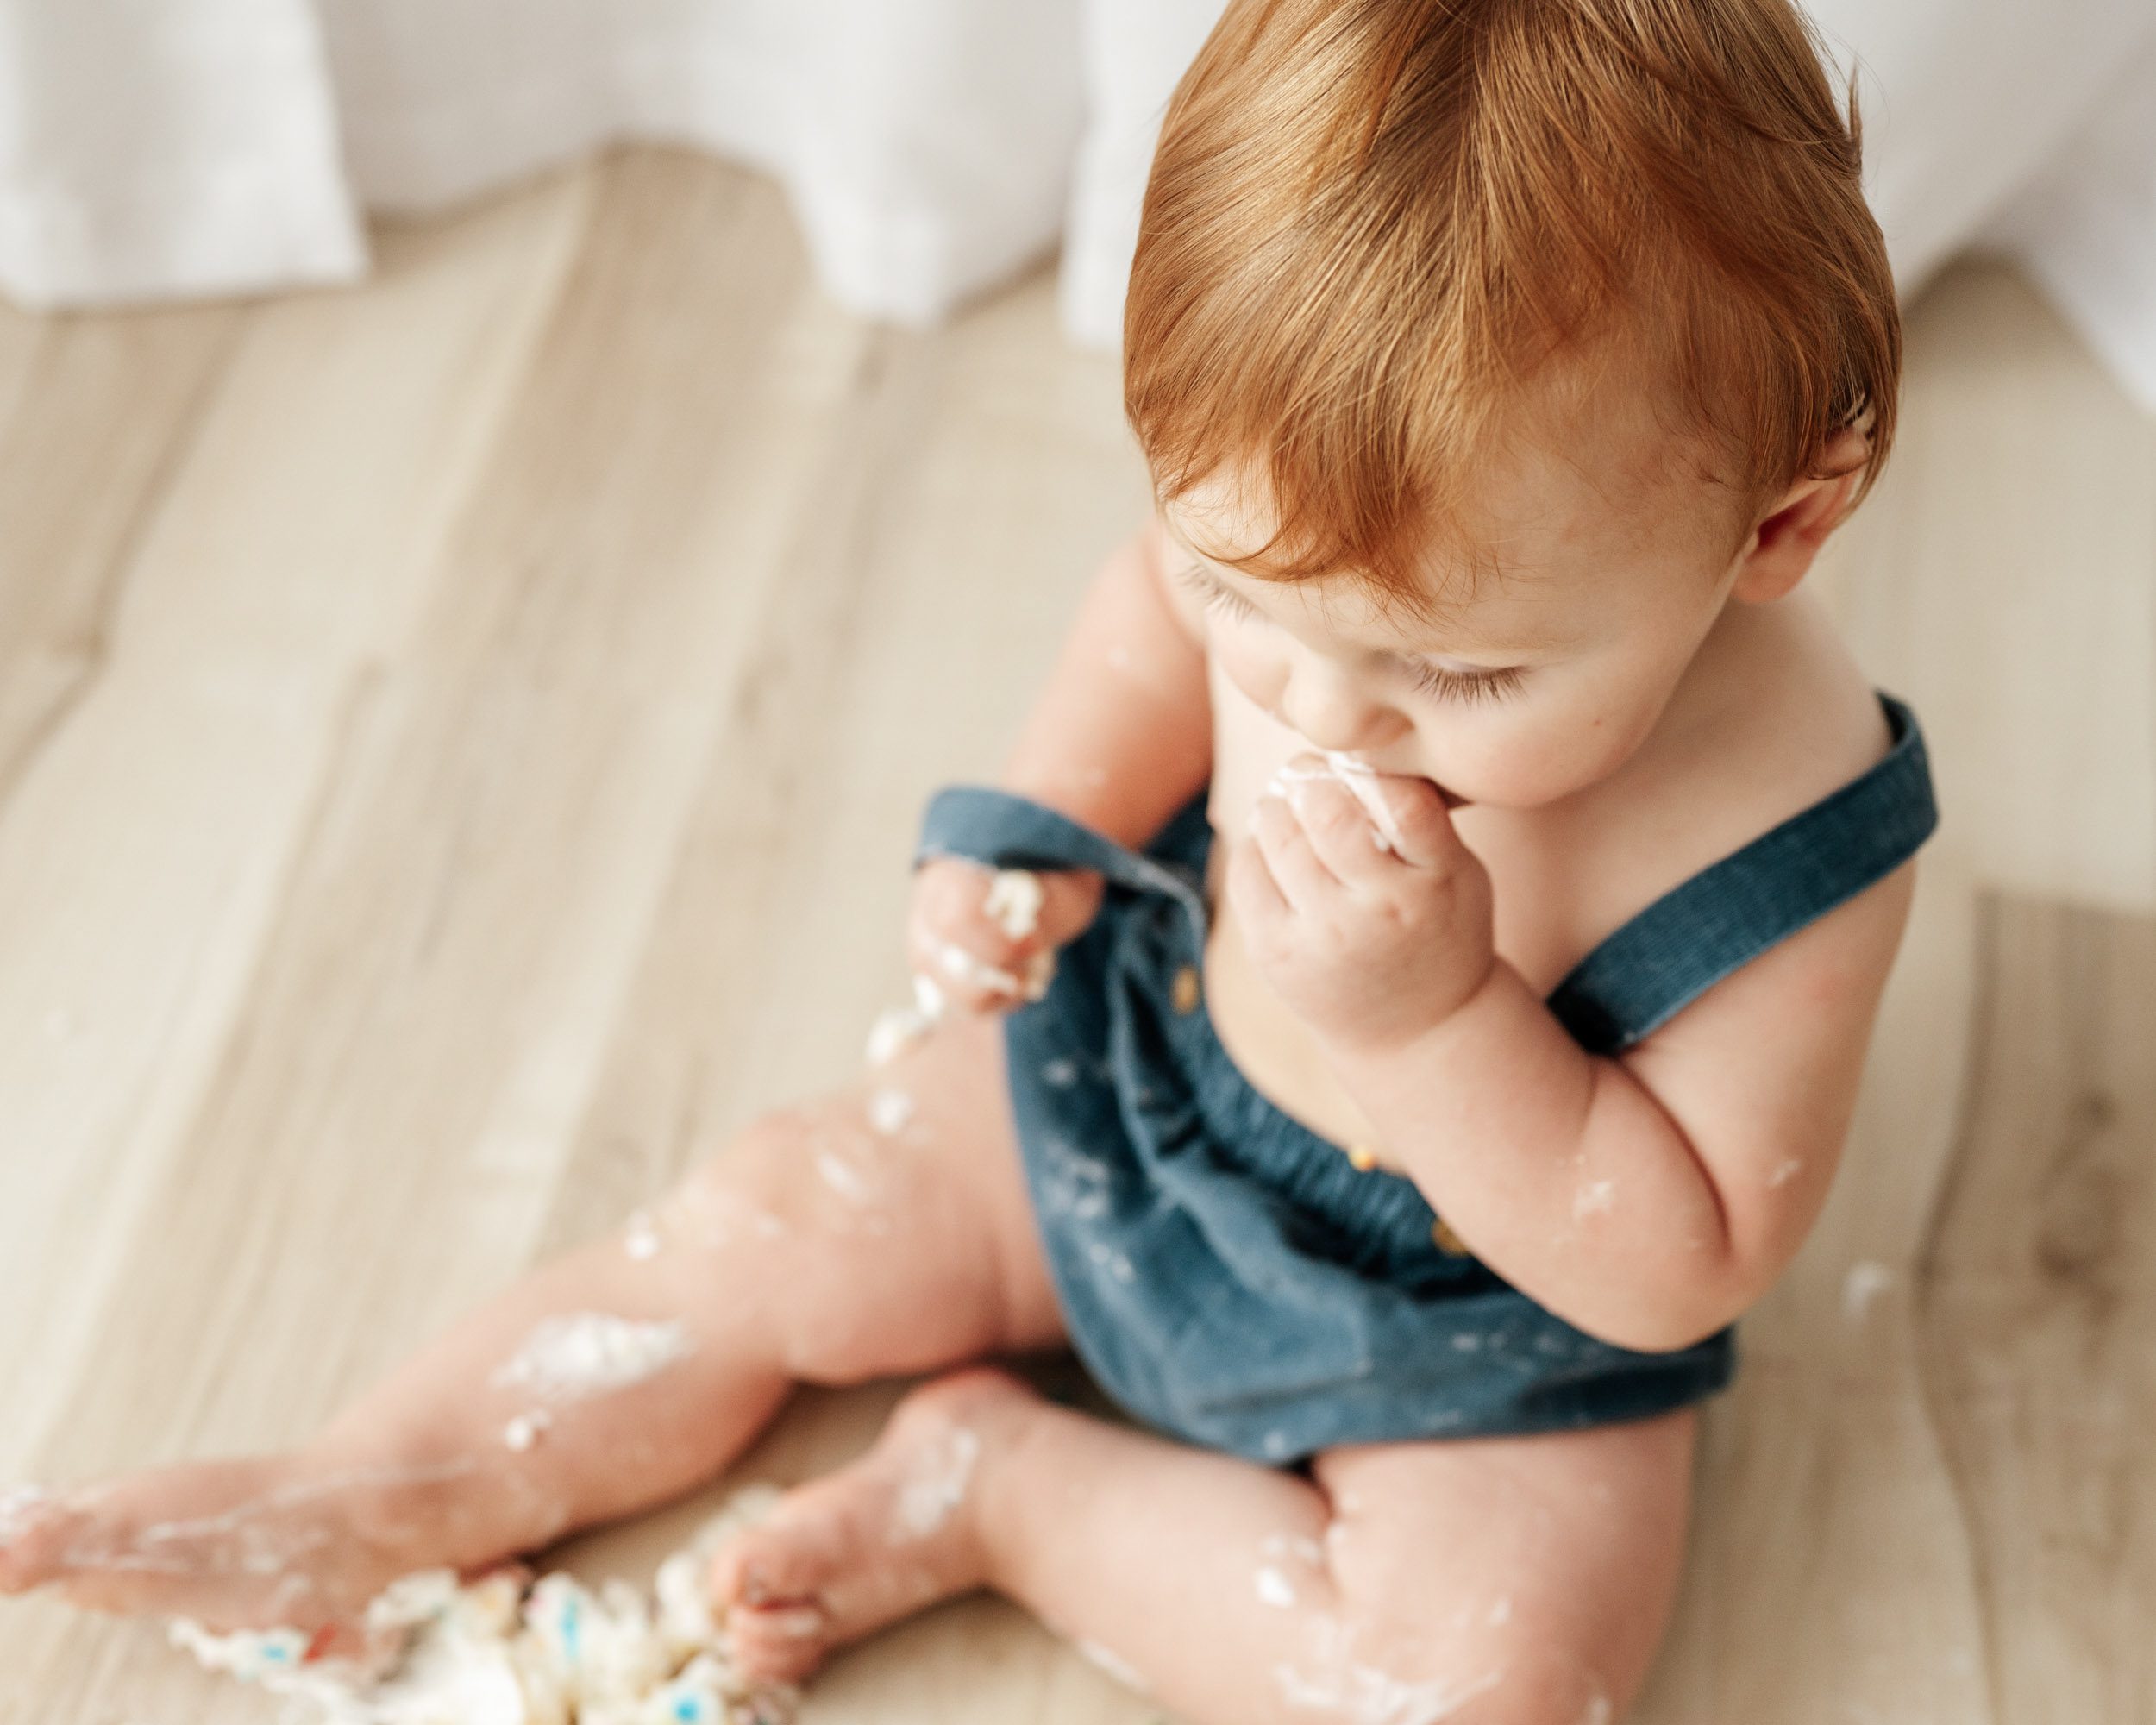 a picture taken from above of a young boy wearing blue shorts with suspenders putting a bite of cake in his mouth with his hand during a 1st birthday cake smash photoshoot